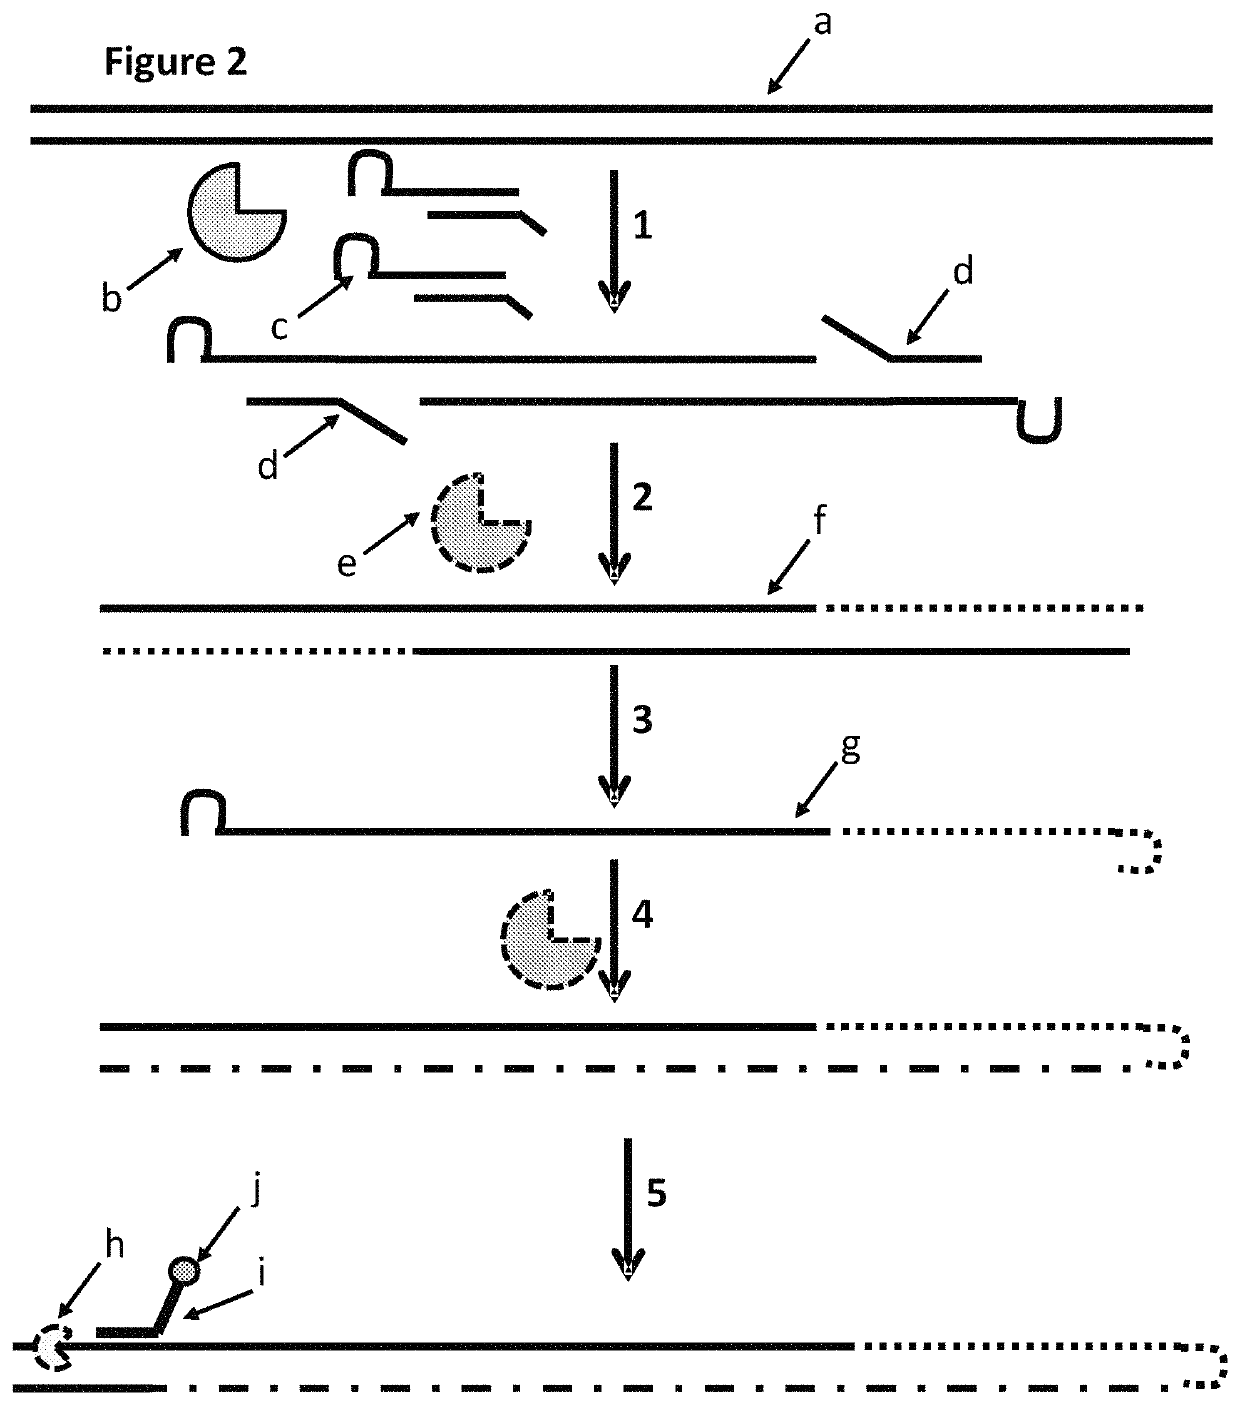 Method for modifying a template double stranded polynucleotide using a MuA transposase